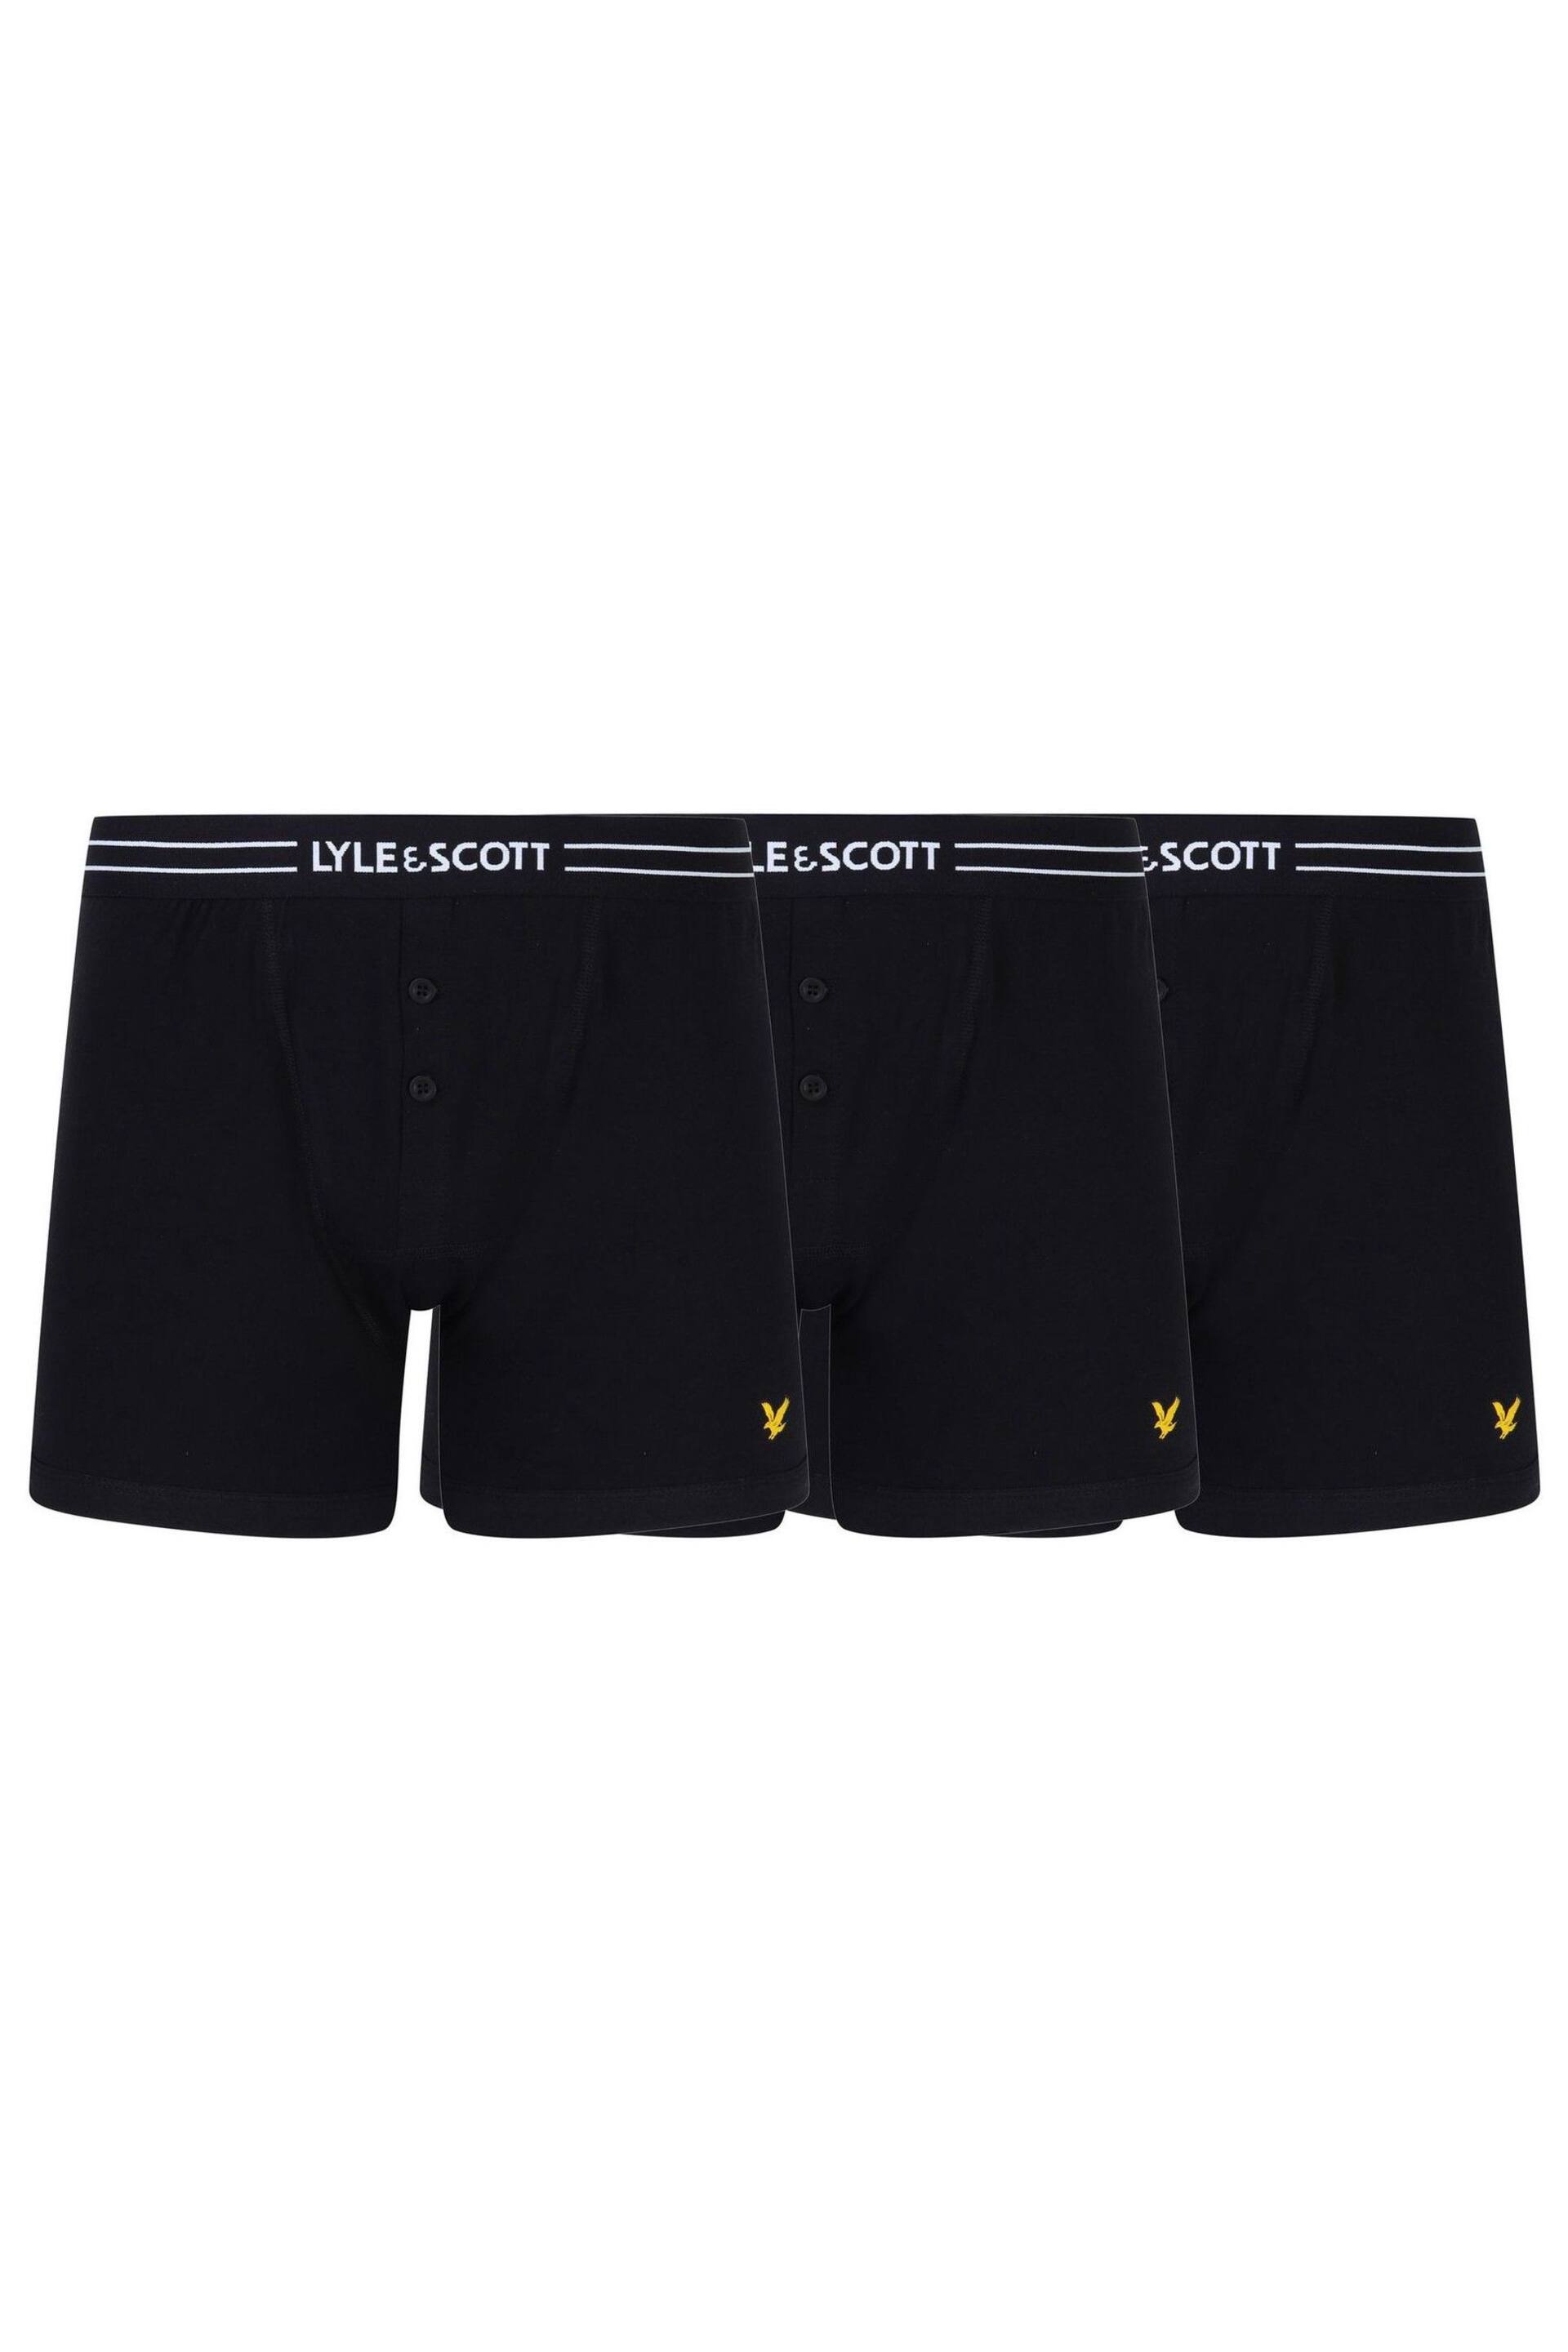 Lyle & Scott Button Fly Trunks Three Pack - Image 1 of 4